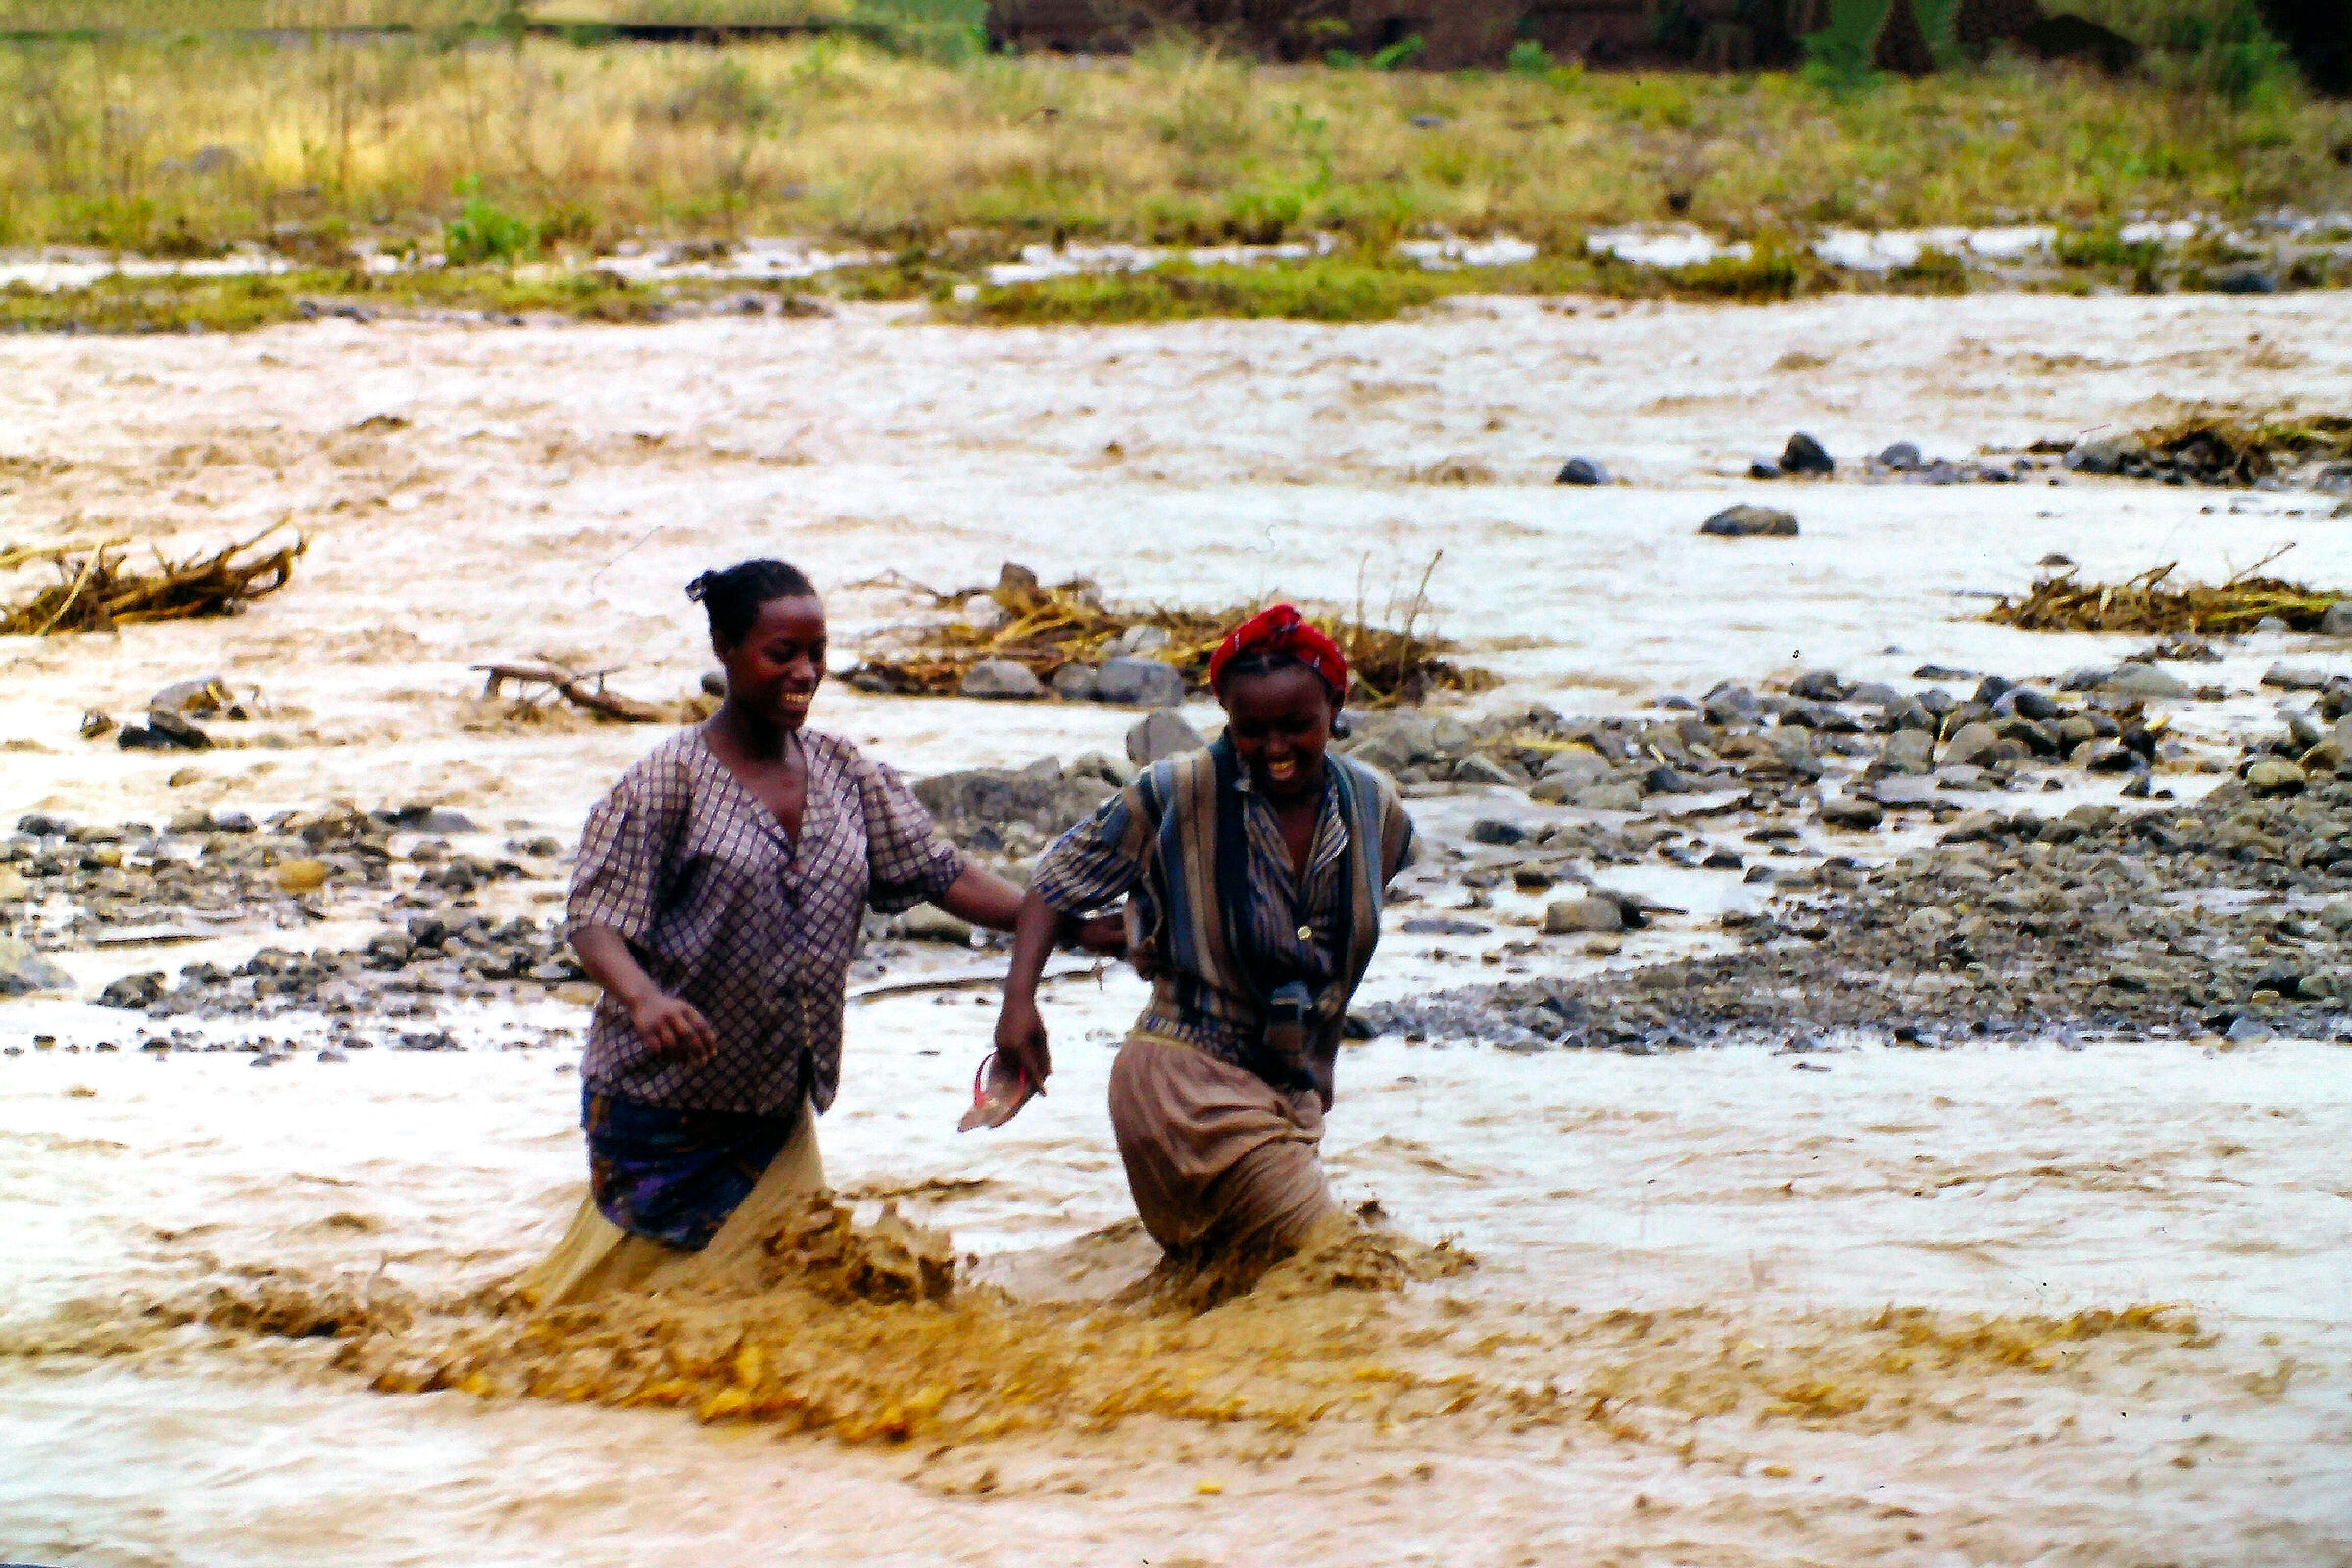 Ethiopia 1998- "And to think that yesterday was all dry!"...